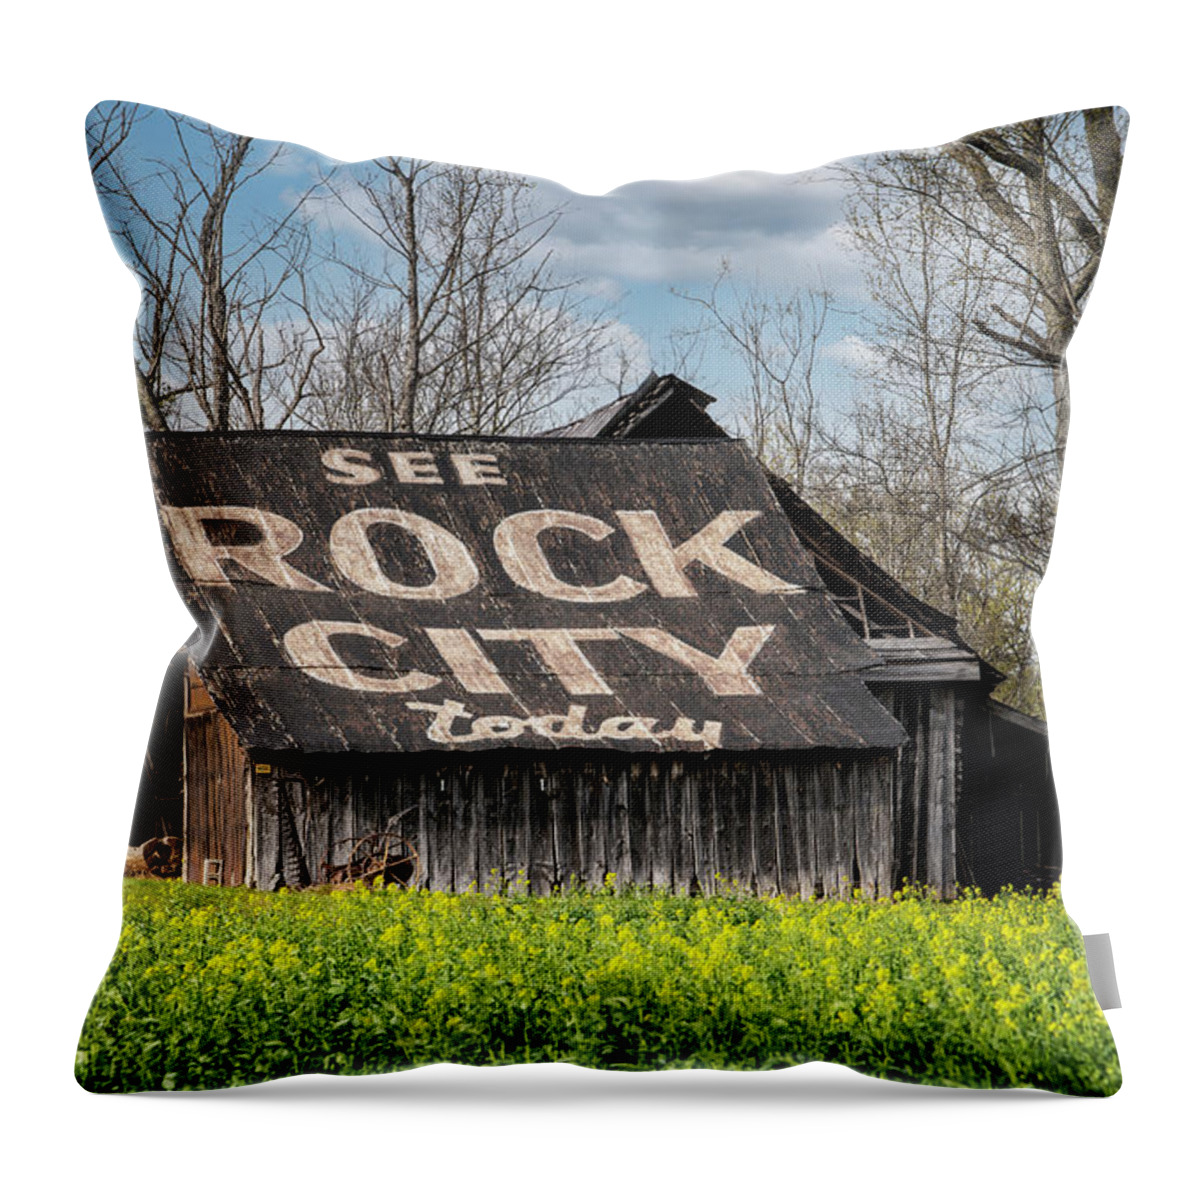 Alabama Throw Pillow featuring the photograph See Rock City Barn by Andy Crawford